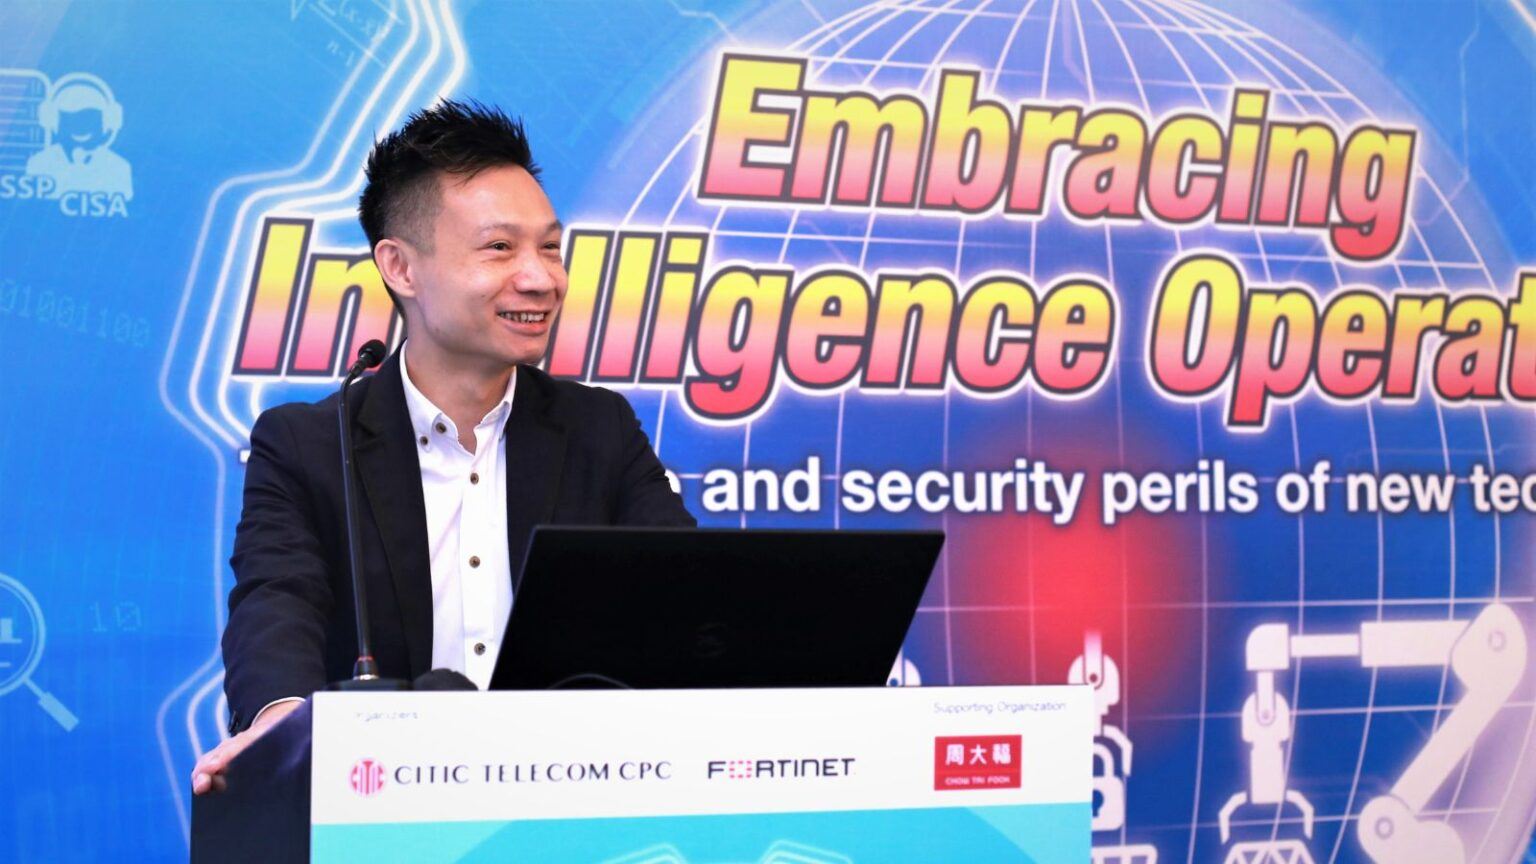 【Digital Transformation】Overhauling the Network and Information Security Architecture to Avoid Security Vulnerabilities in the Convergence of OT and IT (Chinese only)